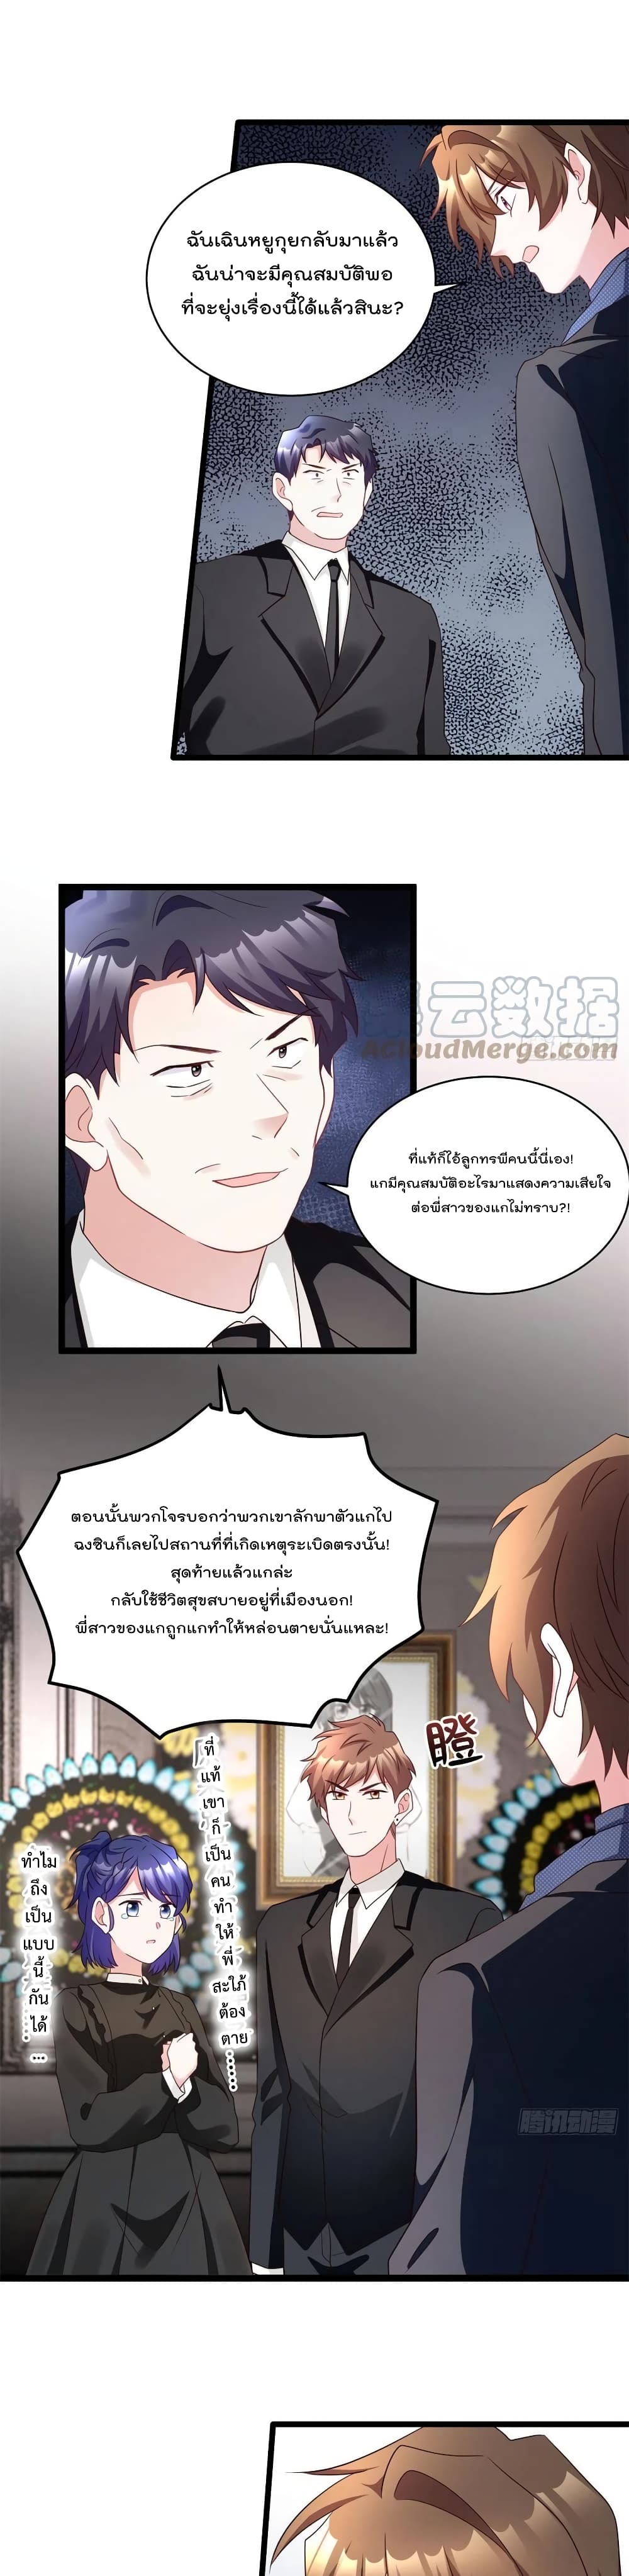 Nancheng waits for the Month to Return 96 แปลไทย